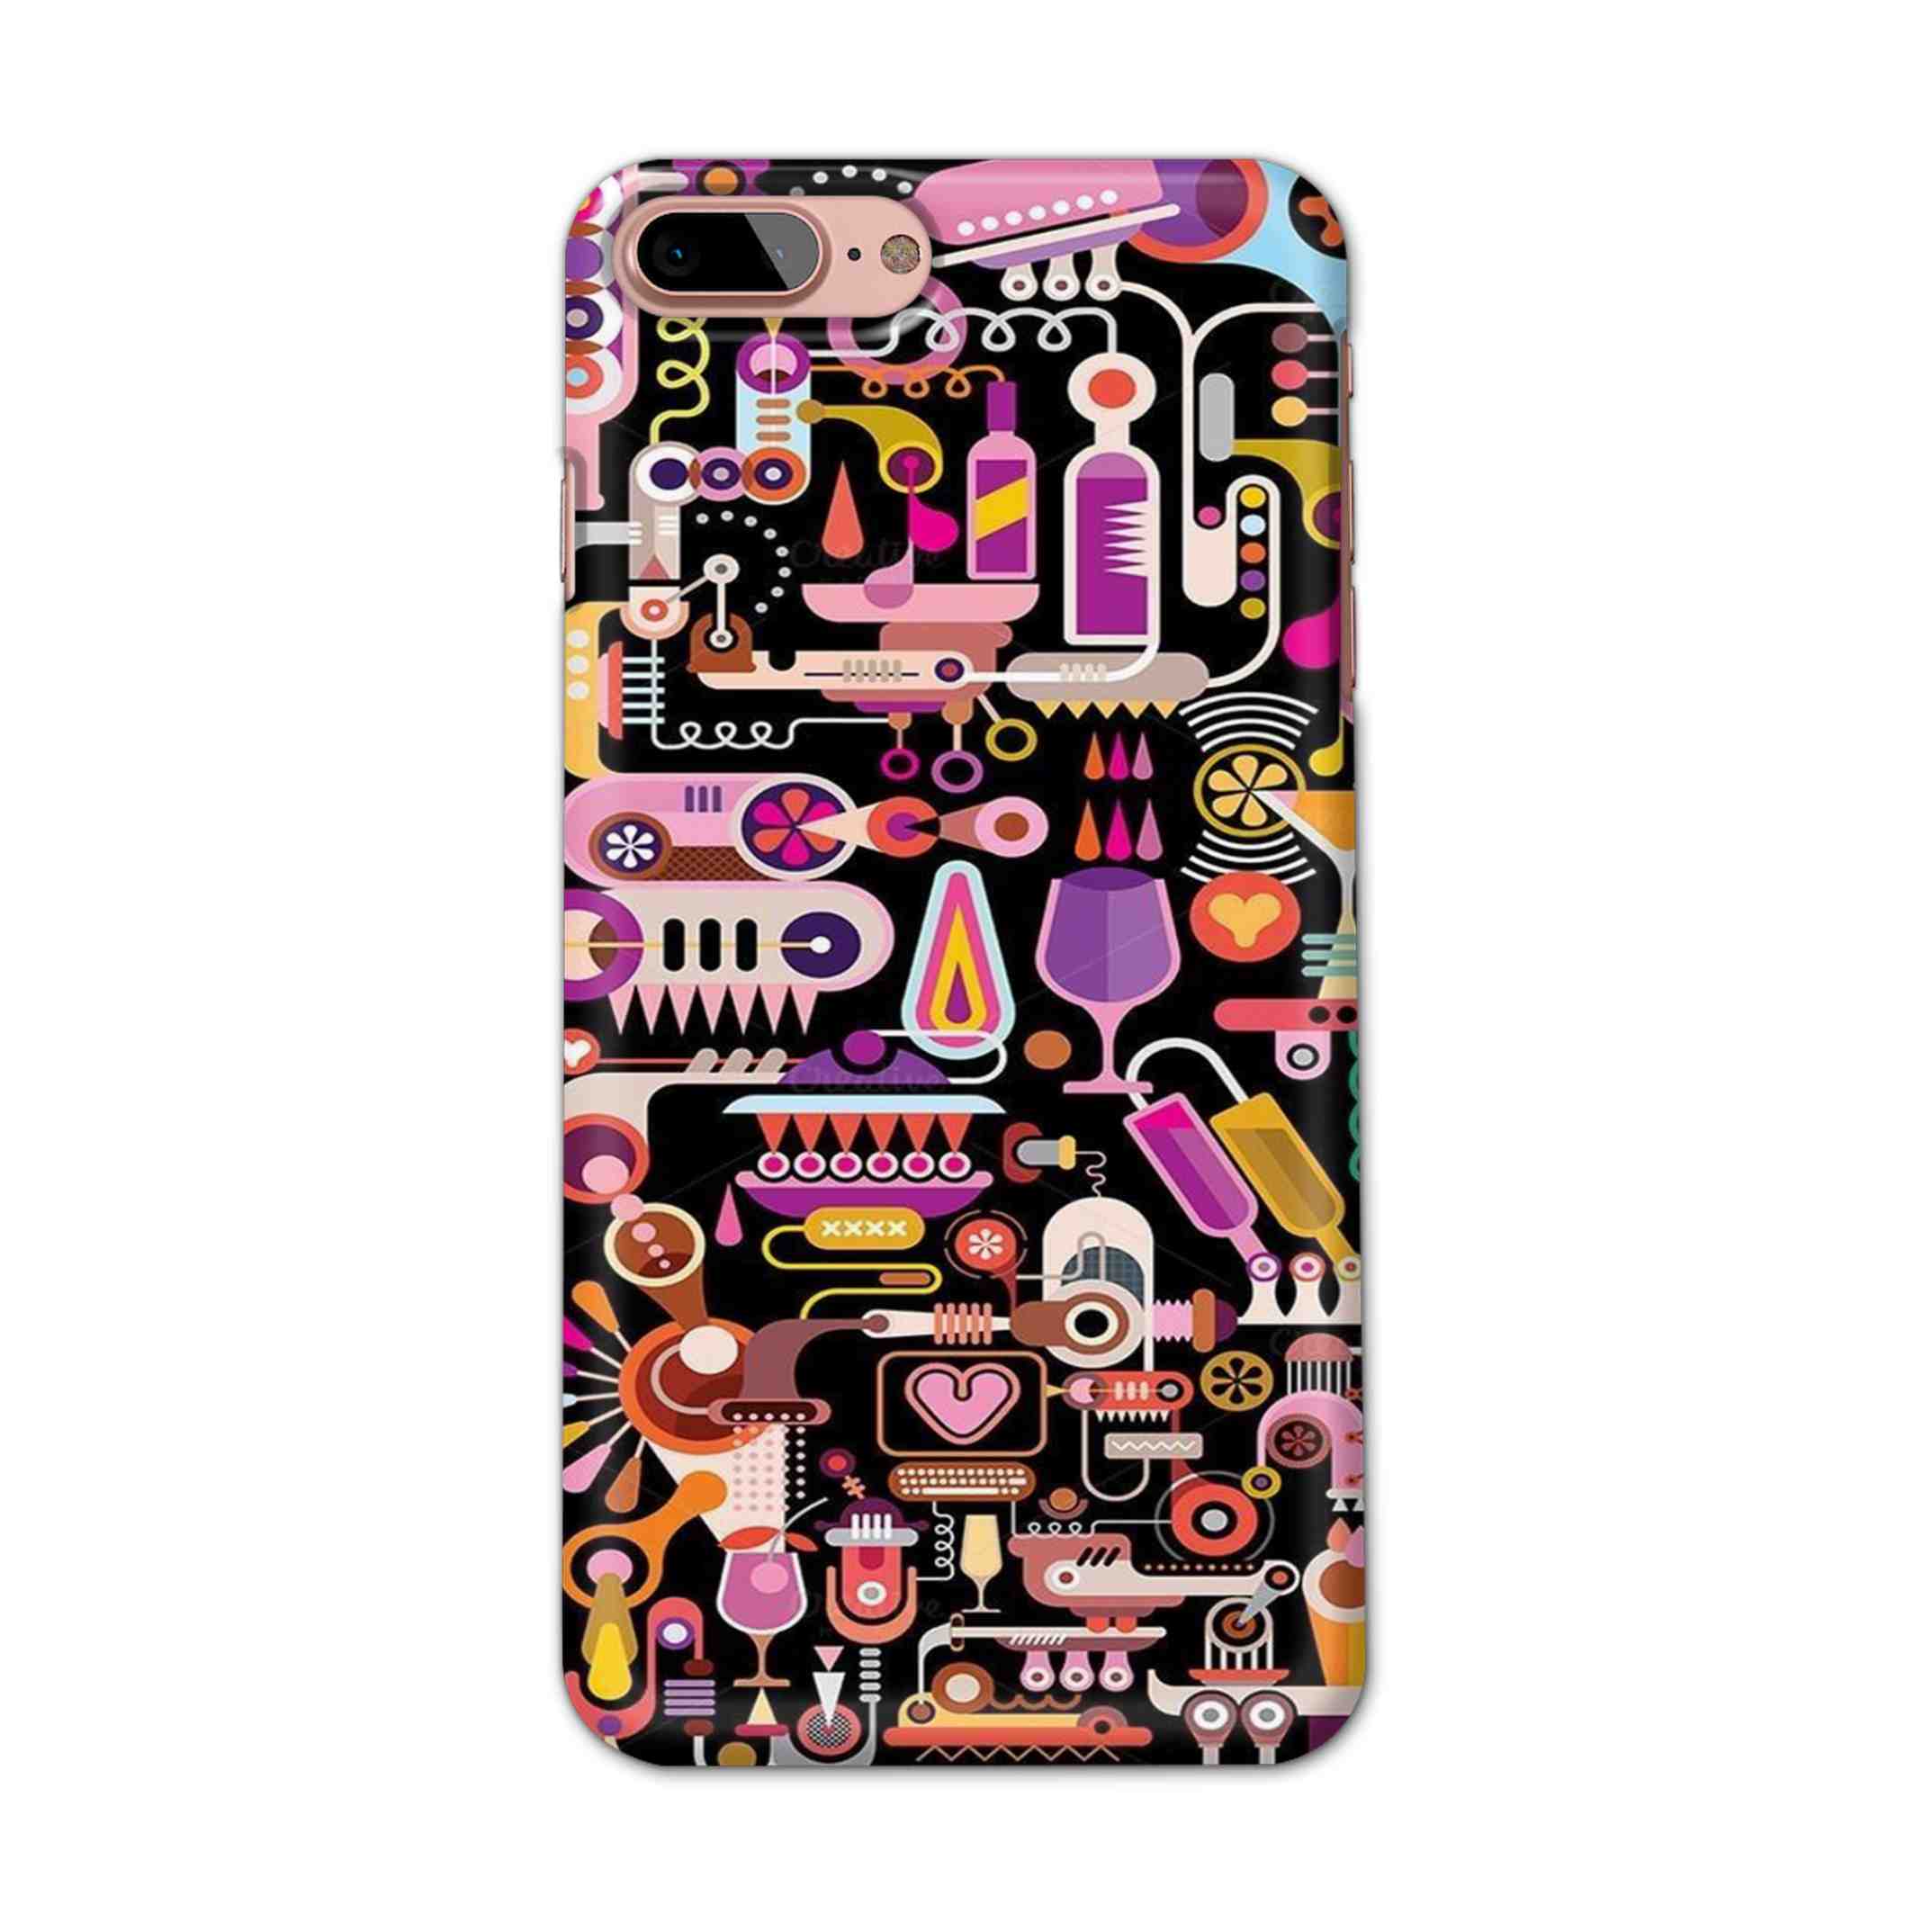 Buy Art Hard Back Mobile Phone Case/Cover For iPhone 7 Plus / 8 Plus Online